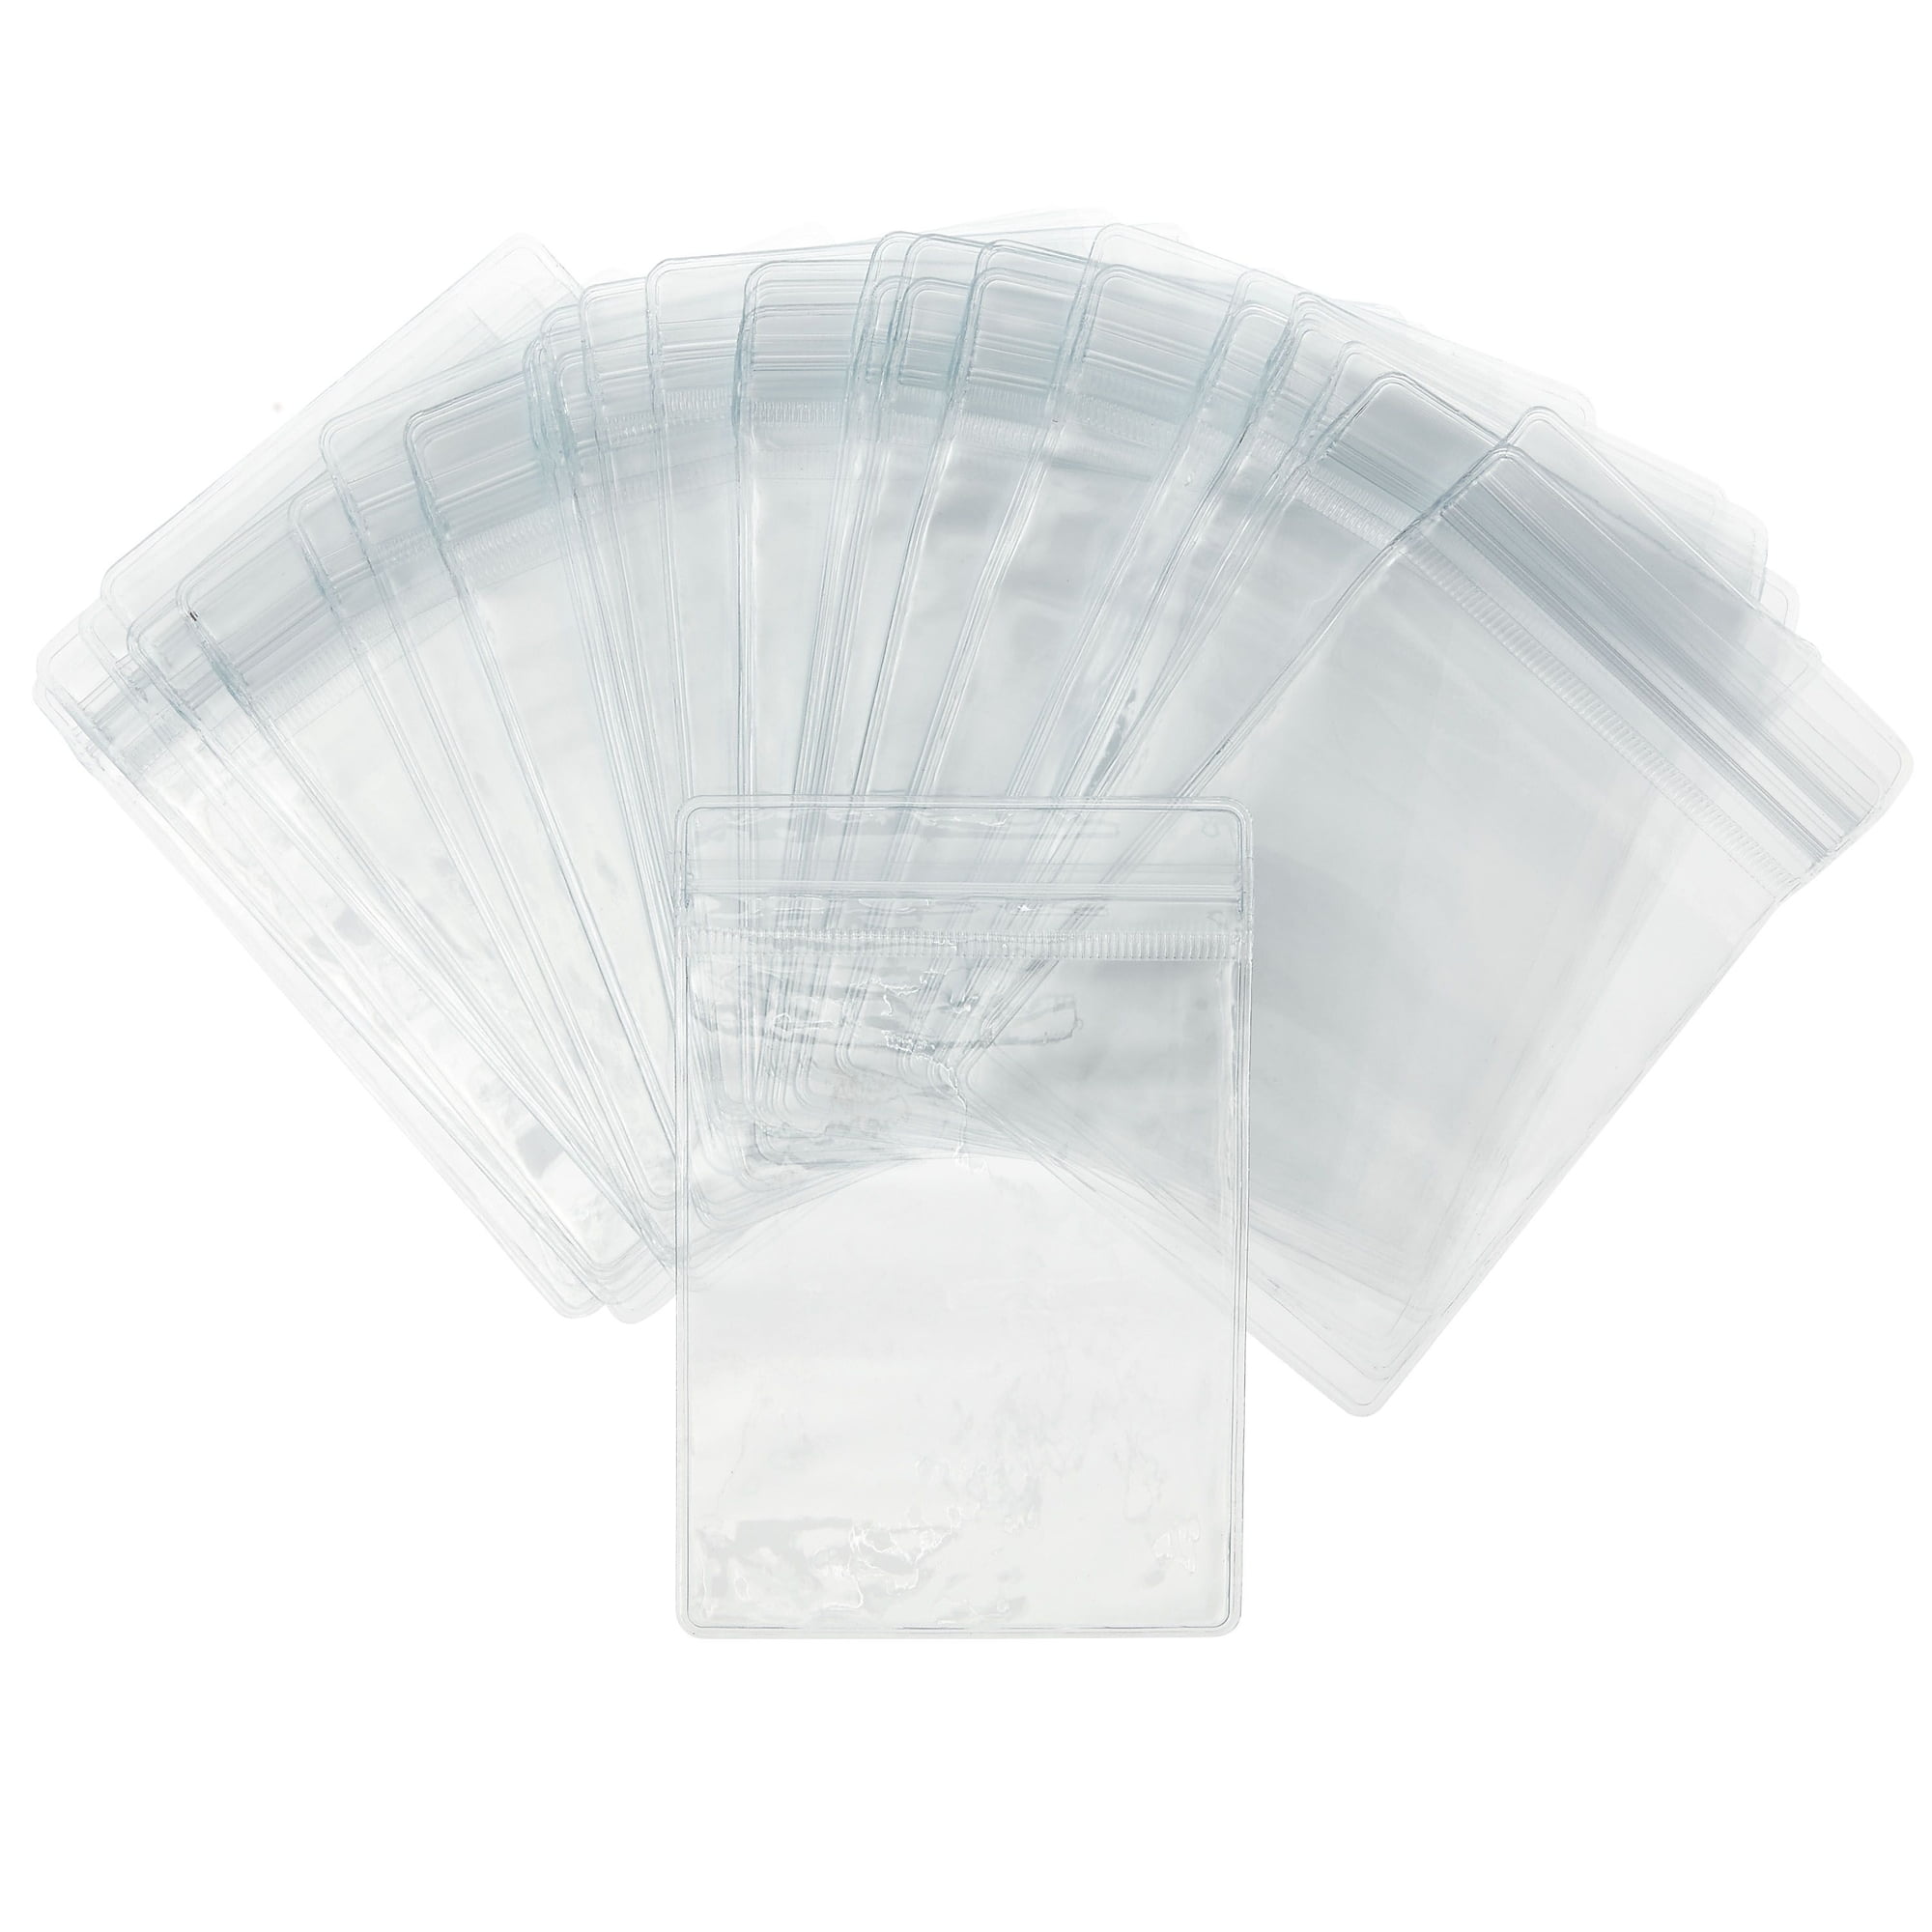 100 Pack Clear Plastic Bags for Jewelry, Earrings, Necklaces, Mini Resealable Bags for Small Business (3.15 x 4.75 in)